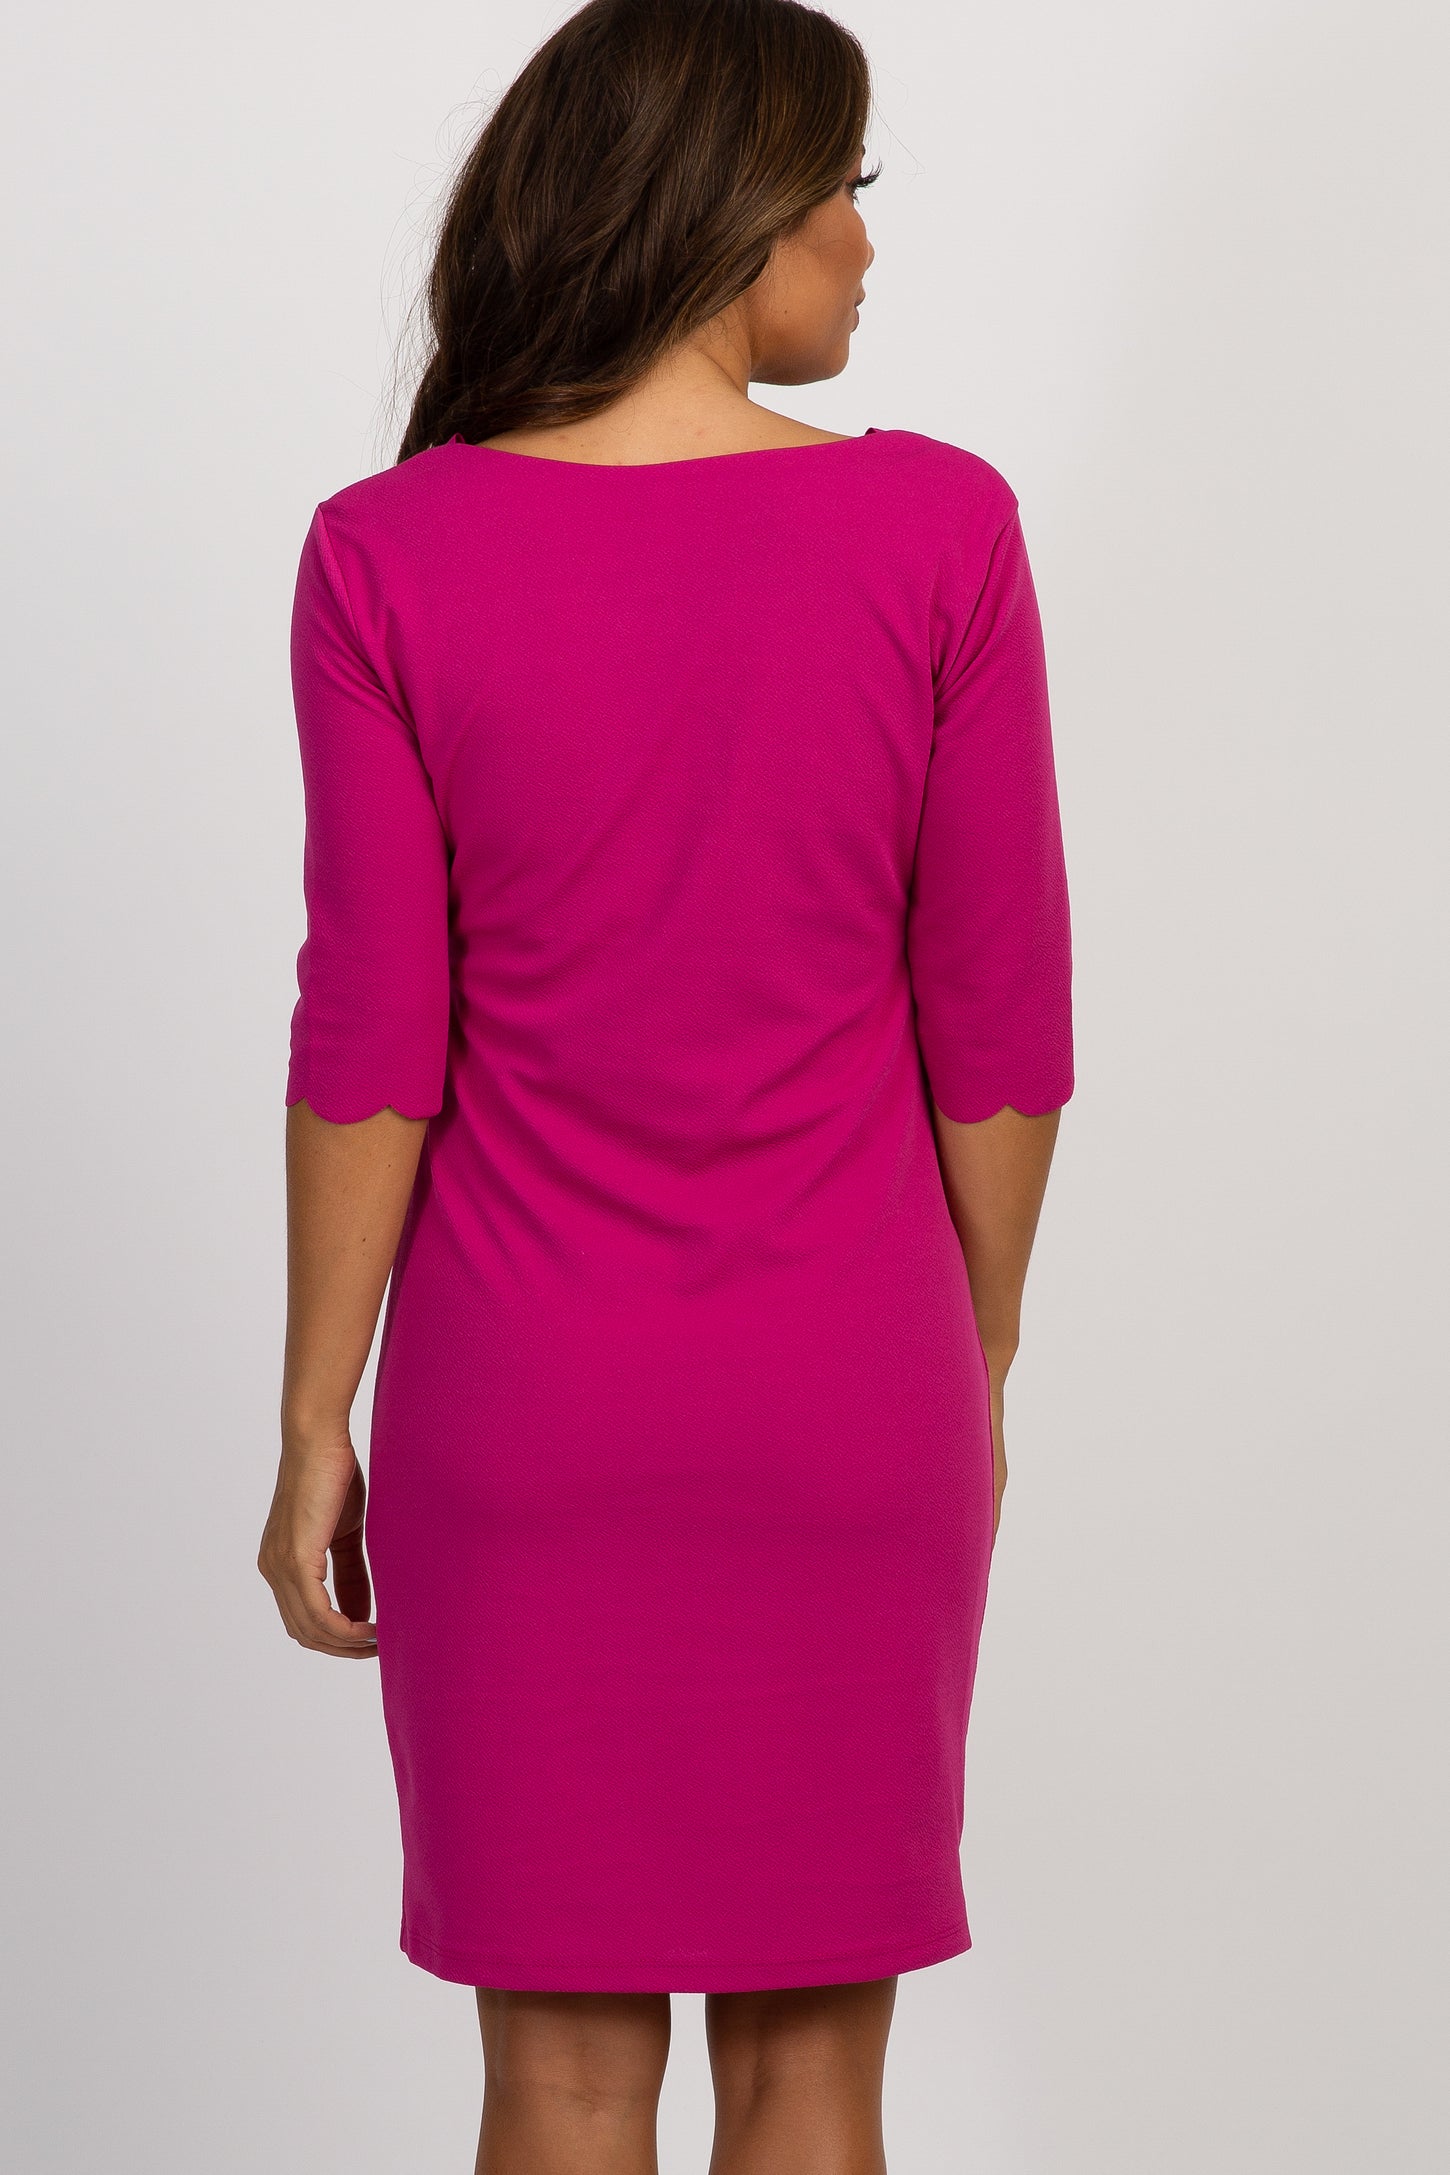 PinkBlush Magenta Solid Scalloped Trim Fitted Maternity Dress